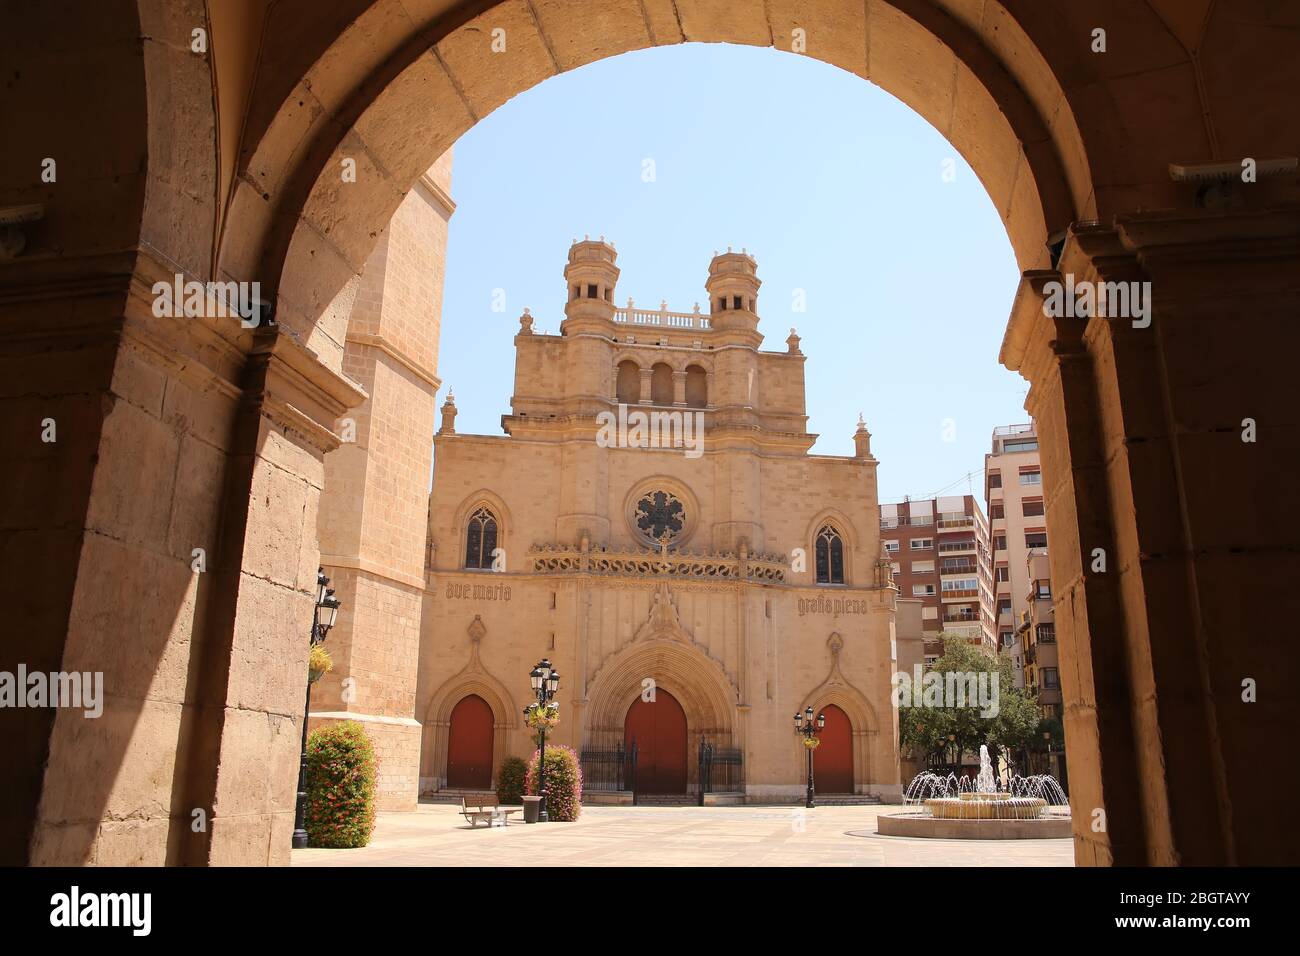 Co-cathedral of Saint Mary or Maria, the cathedral of Castelló de la Plana, located in the comarca of Plana Alta, in the Valencia Community, Spain. Stock Photo